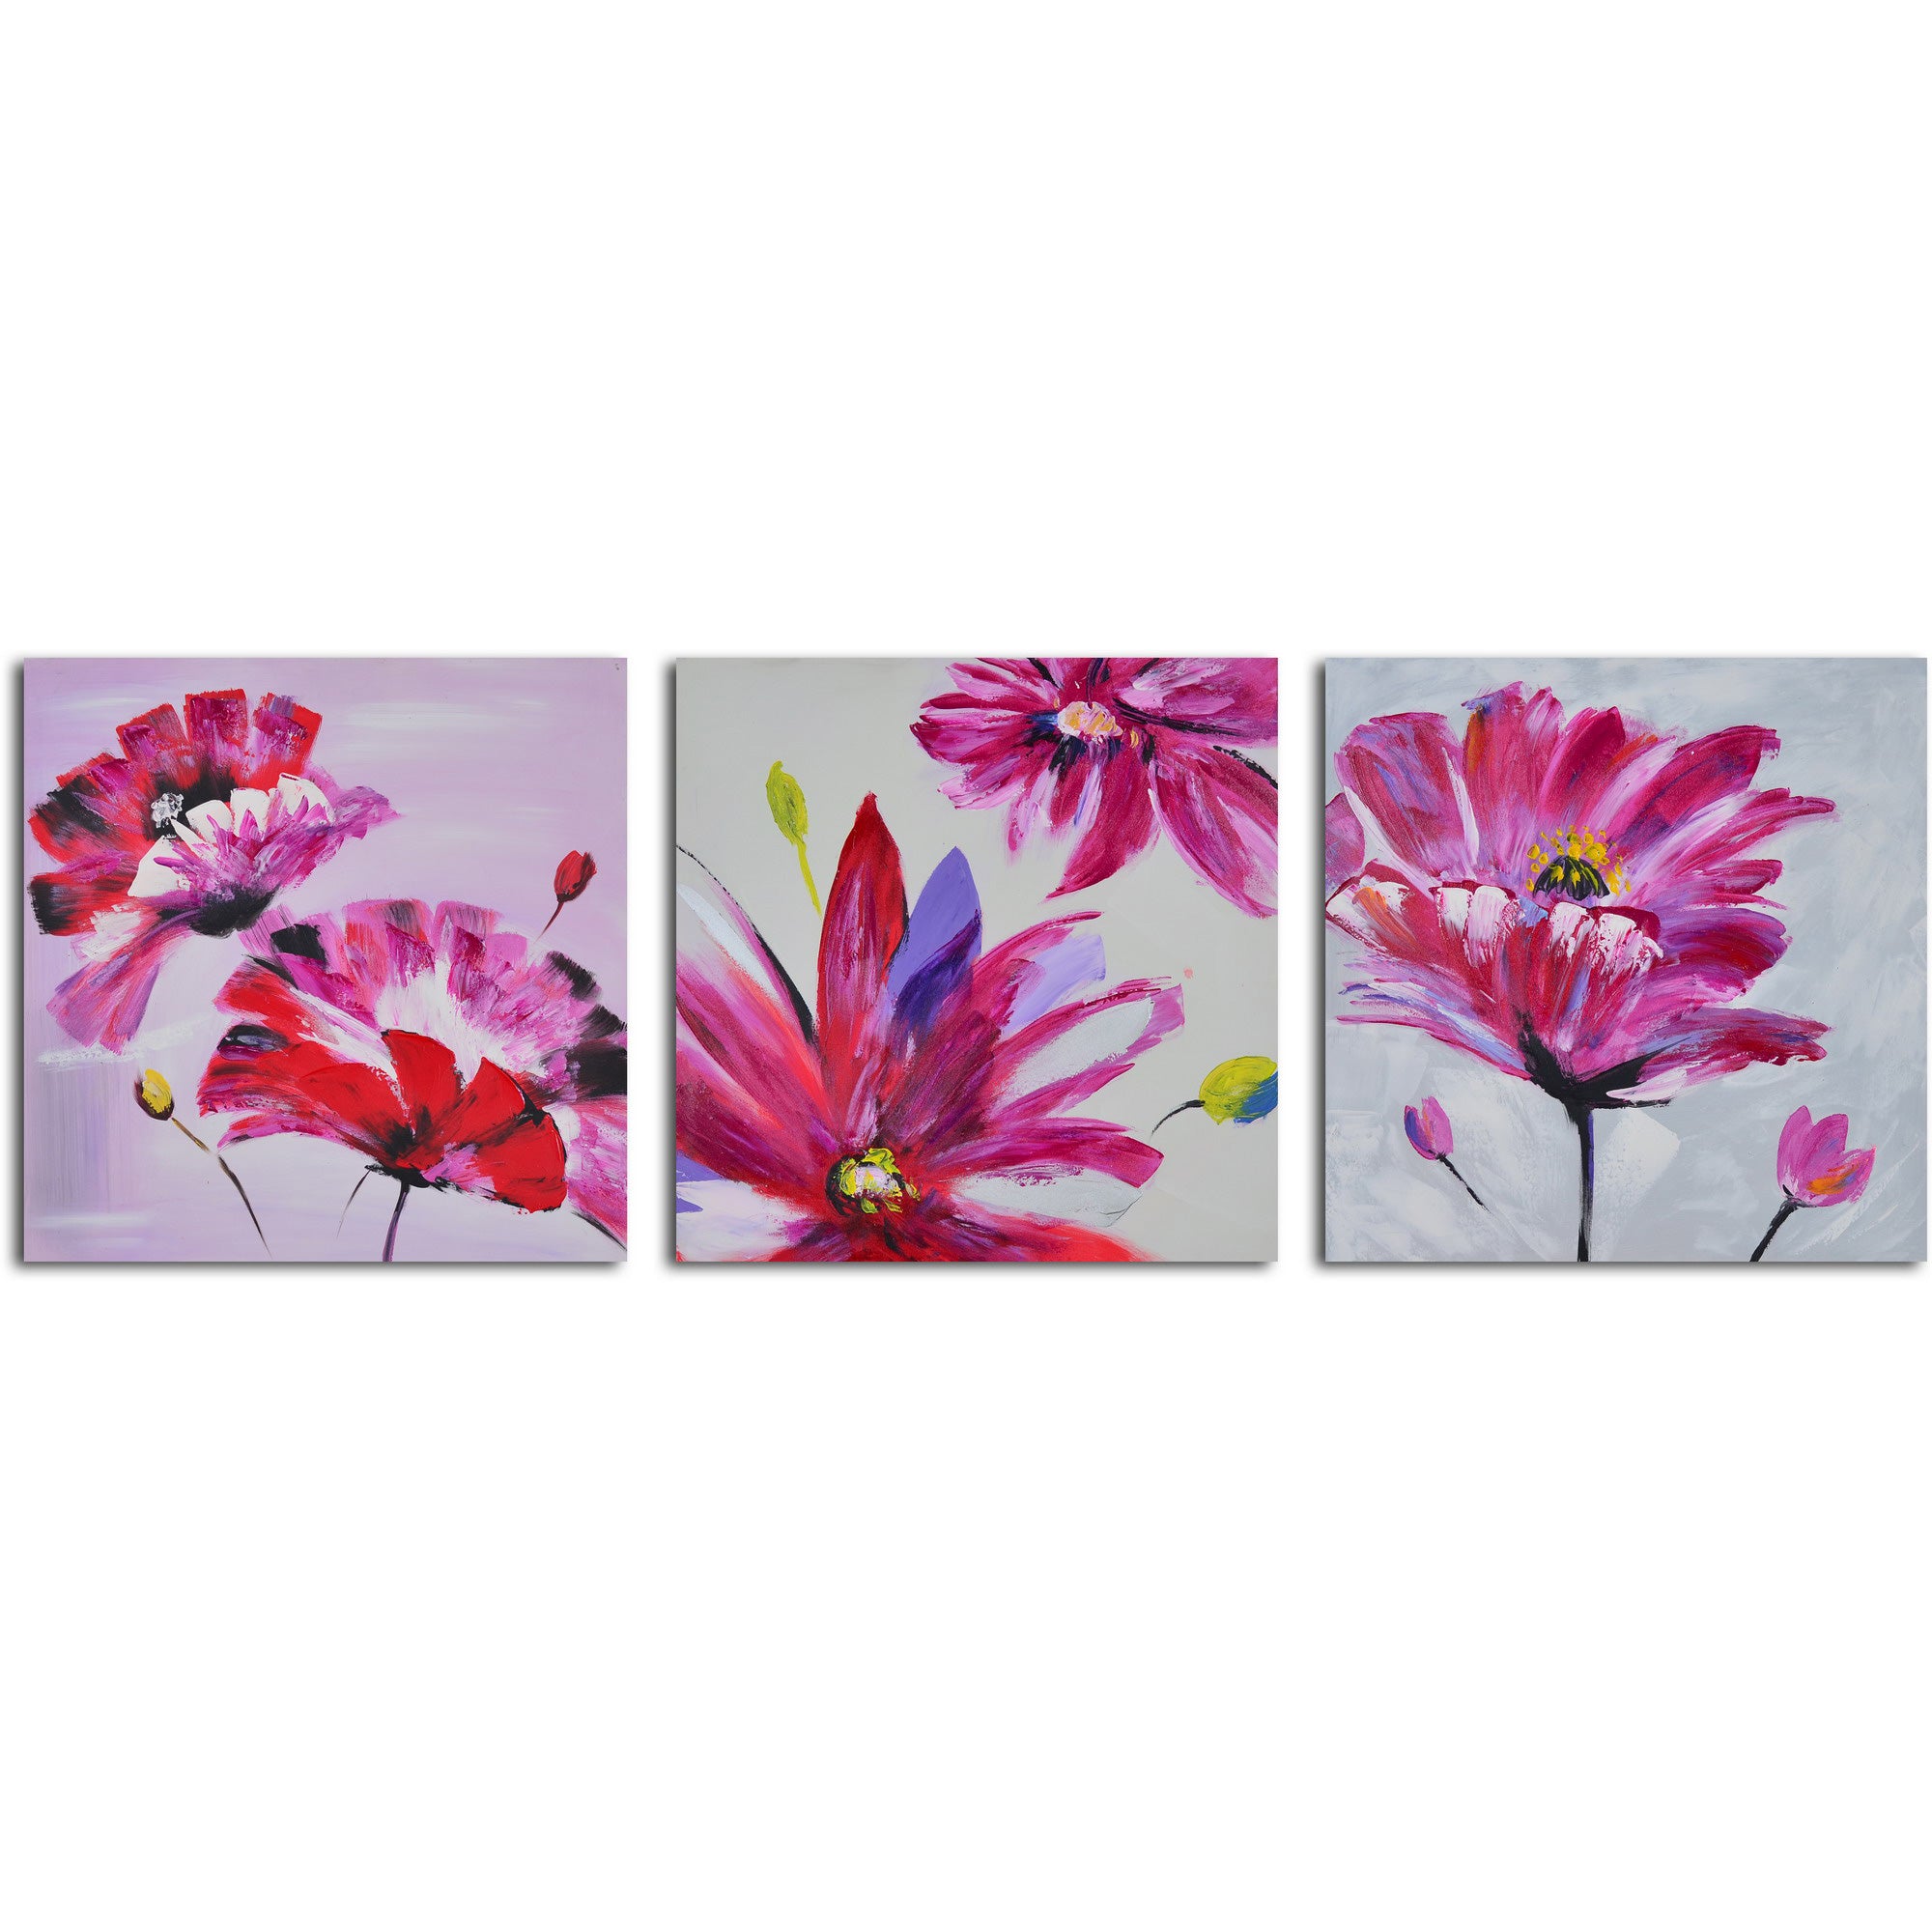 Hand Painted "Frenzy of fuschia florals" 3 Piece Canvas Set